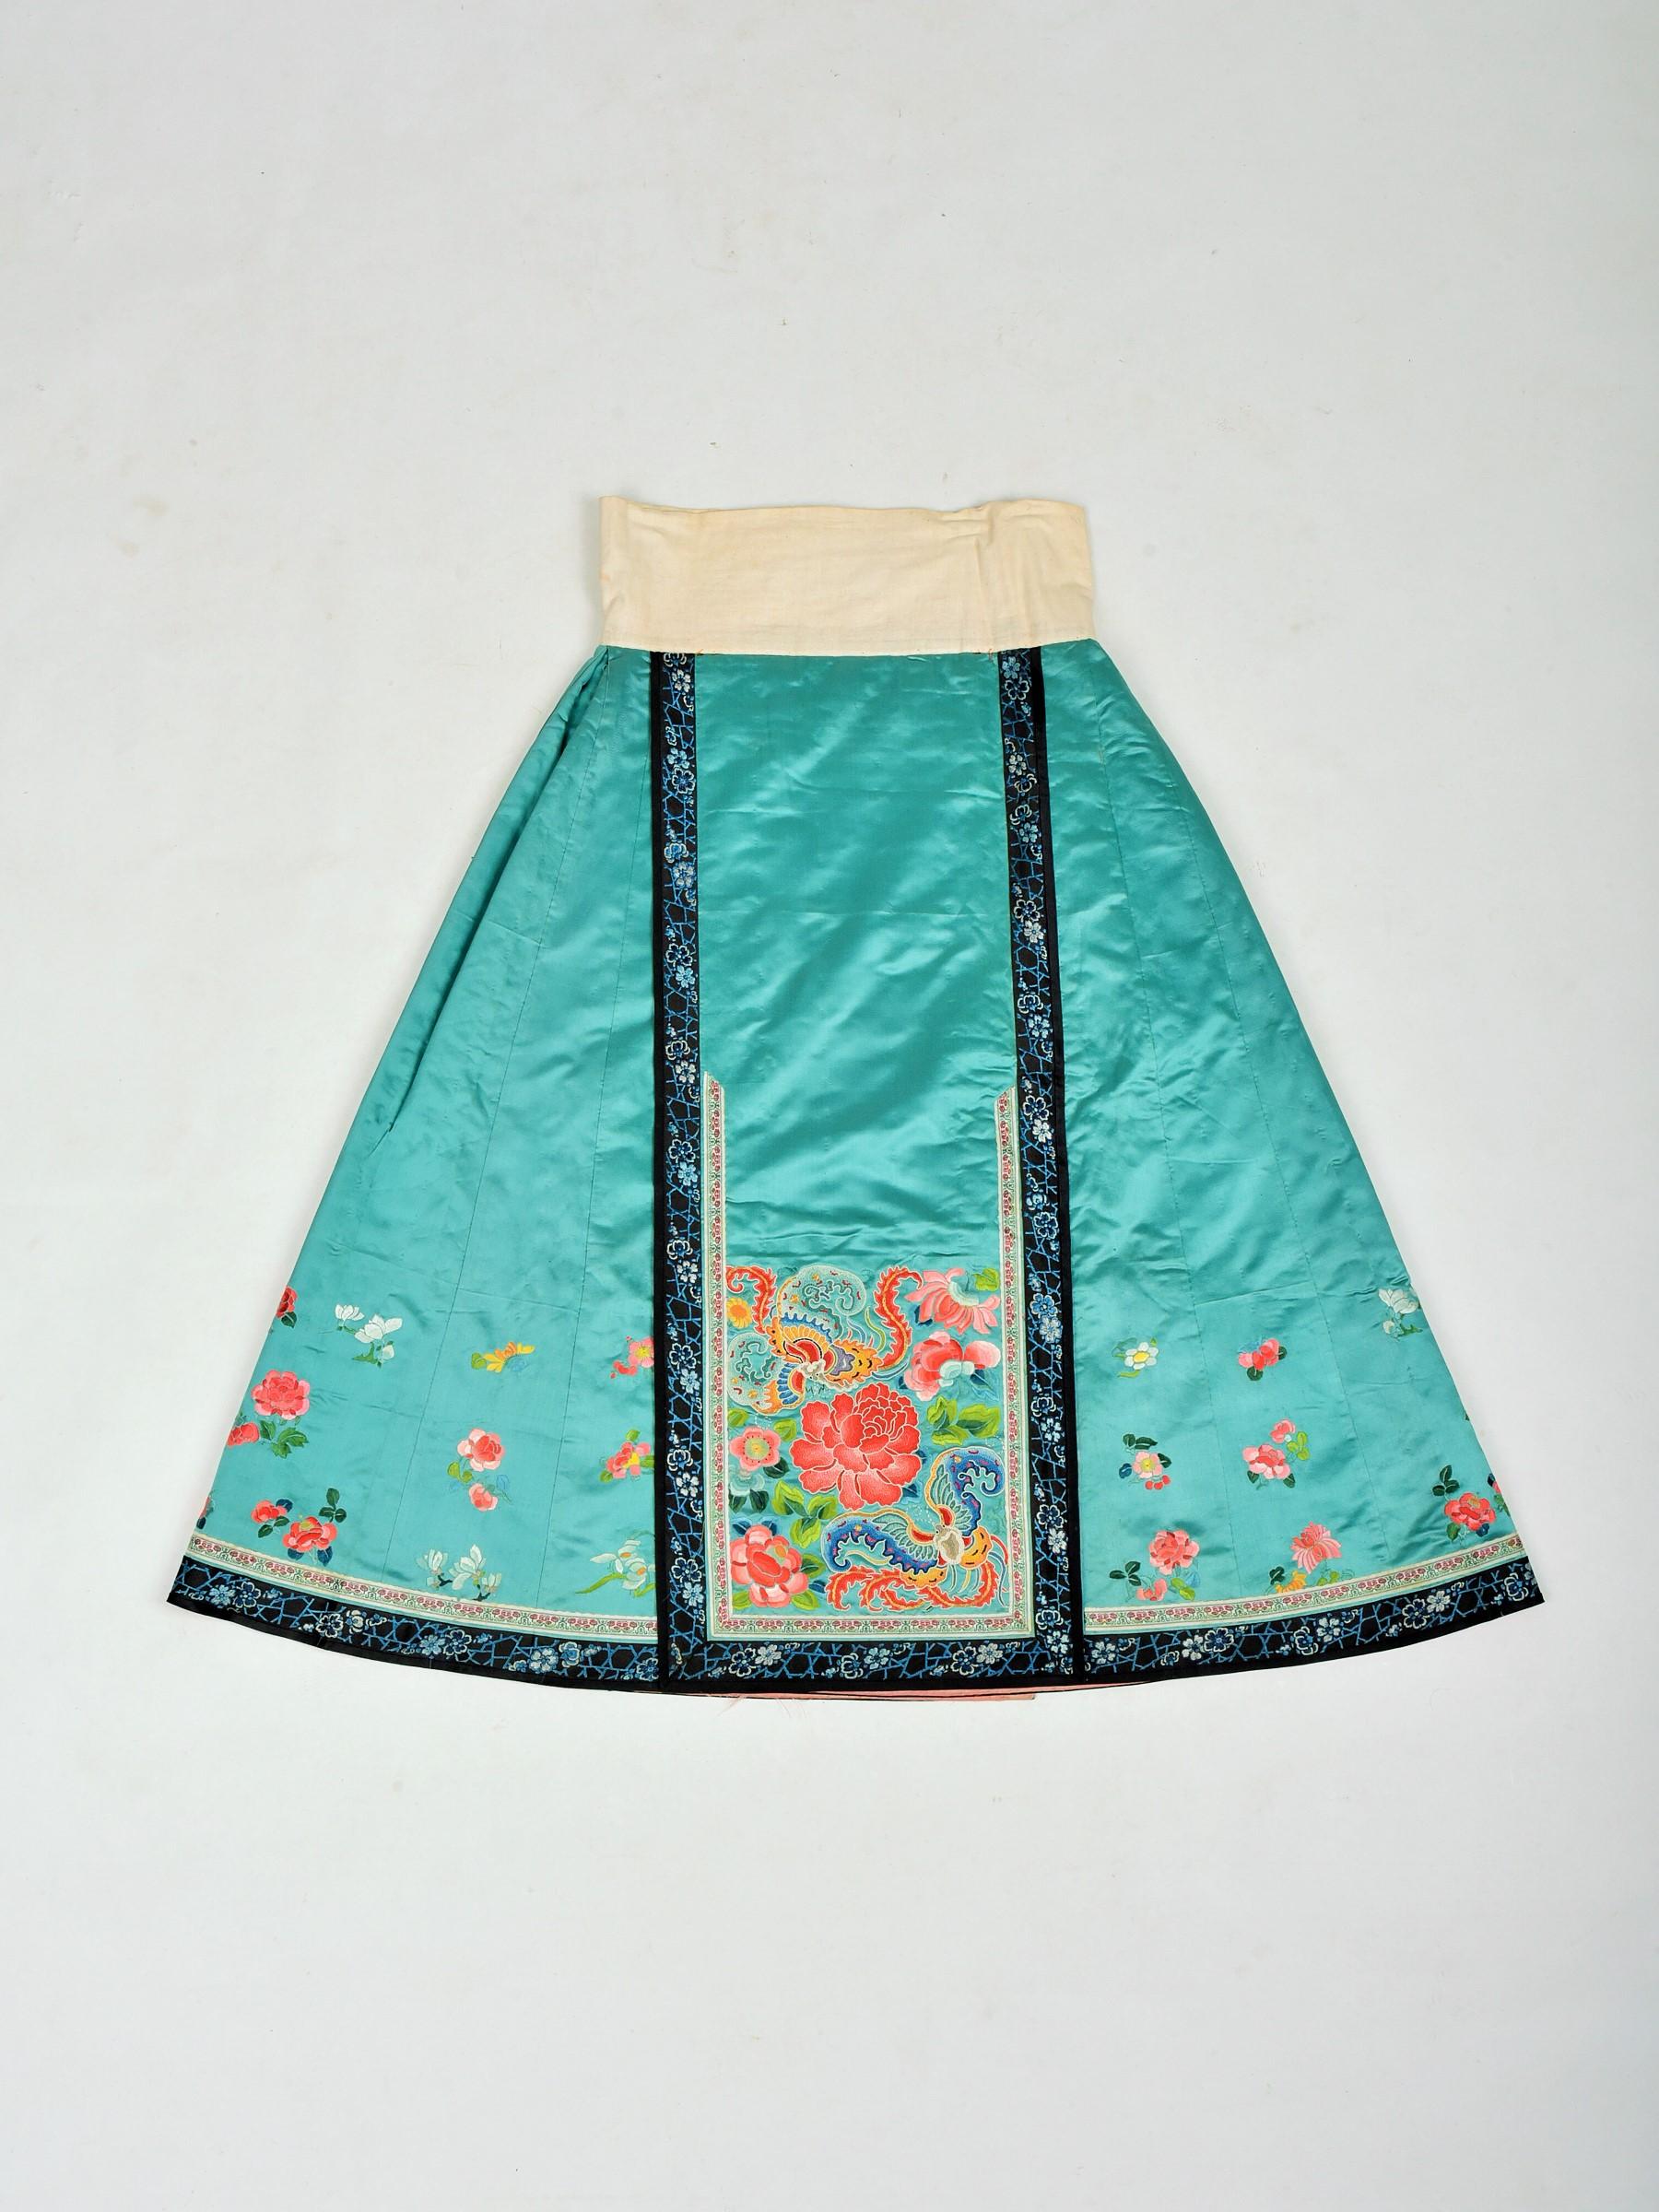 Semi Formal Silk Embroidered Manchu Woman's Skirt and Dress Qing period C.1900 4